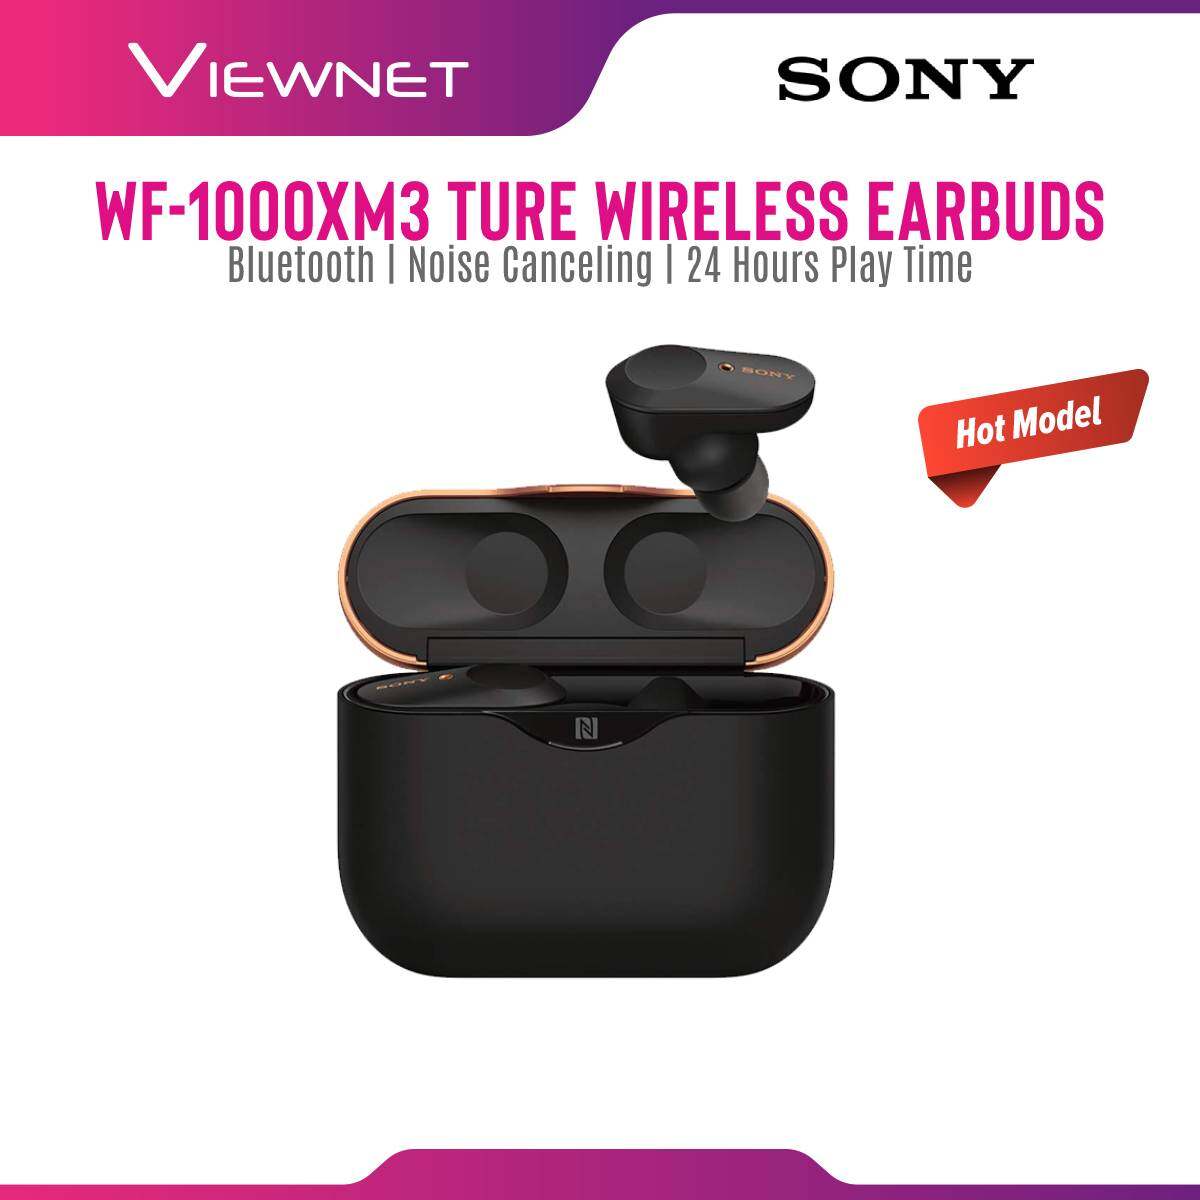 [HOT MODEL] Sony WF-1000XM3 WF1000XM3 Premium Bluetooth Wireless Noise Cancelling In-ear Headphones Earbuds with Charging Case